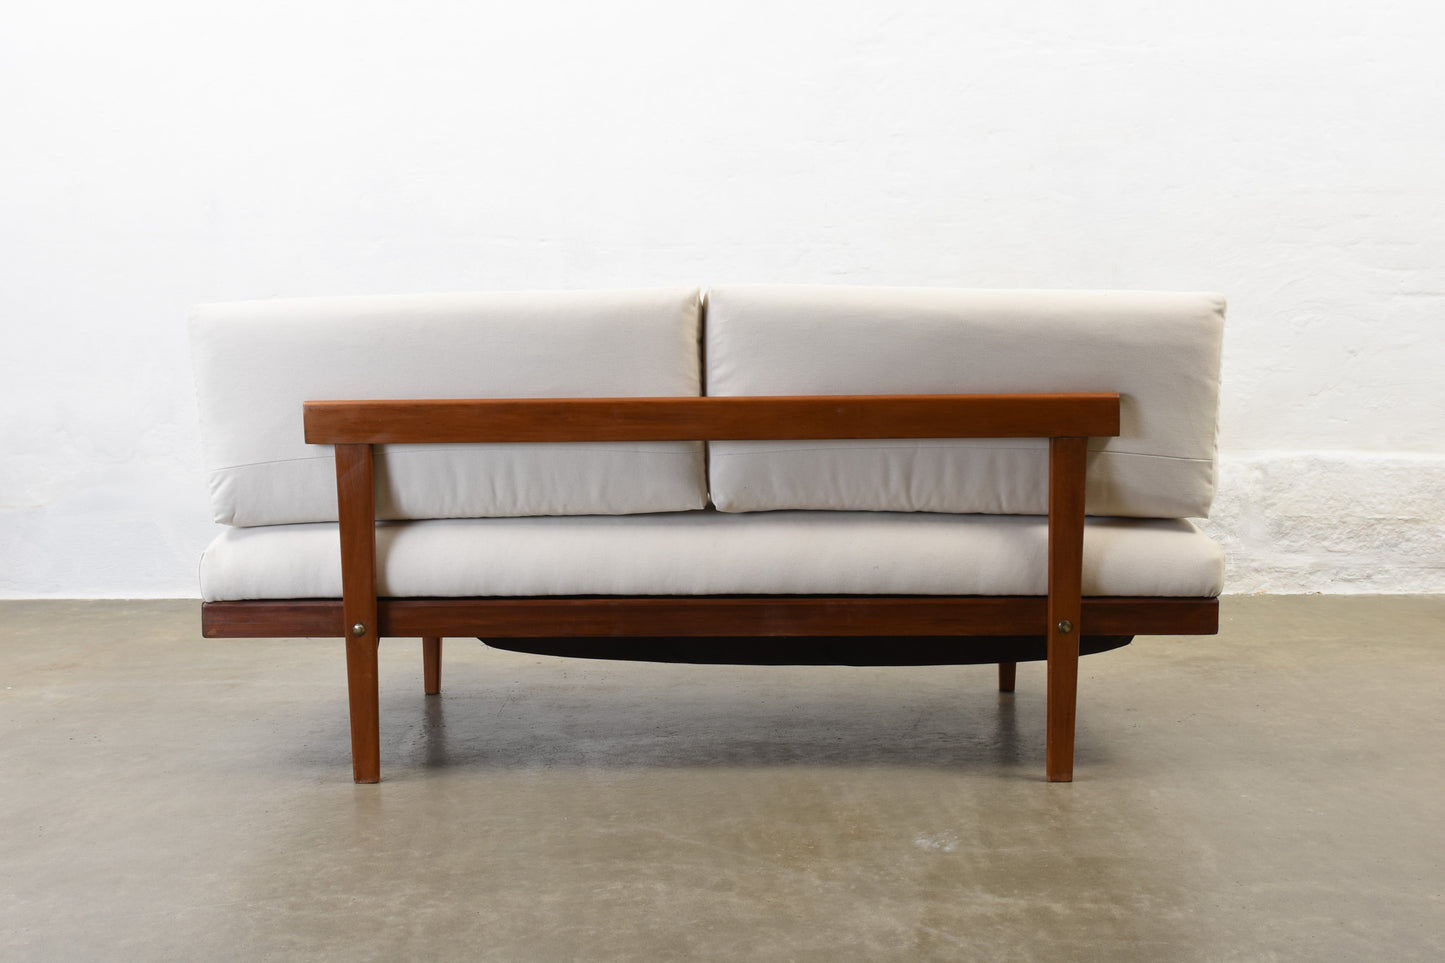 'Svane' day bed by Ingmar Relling